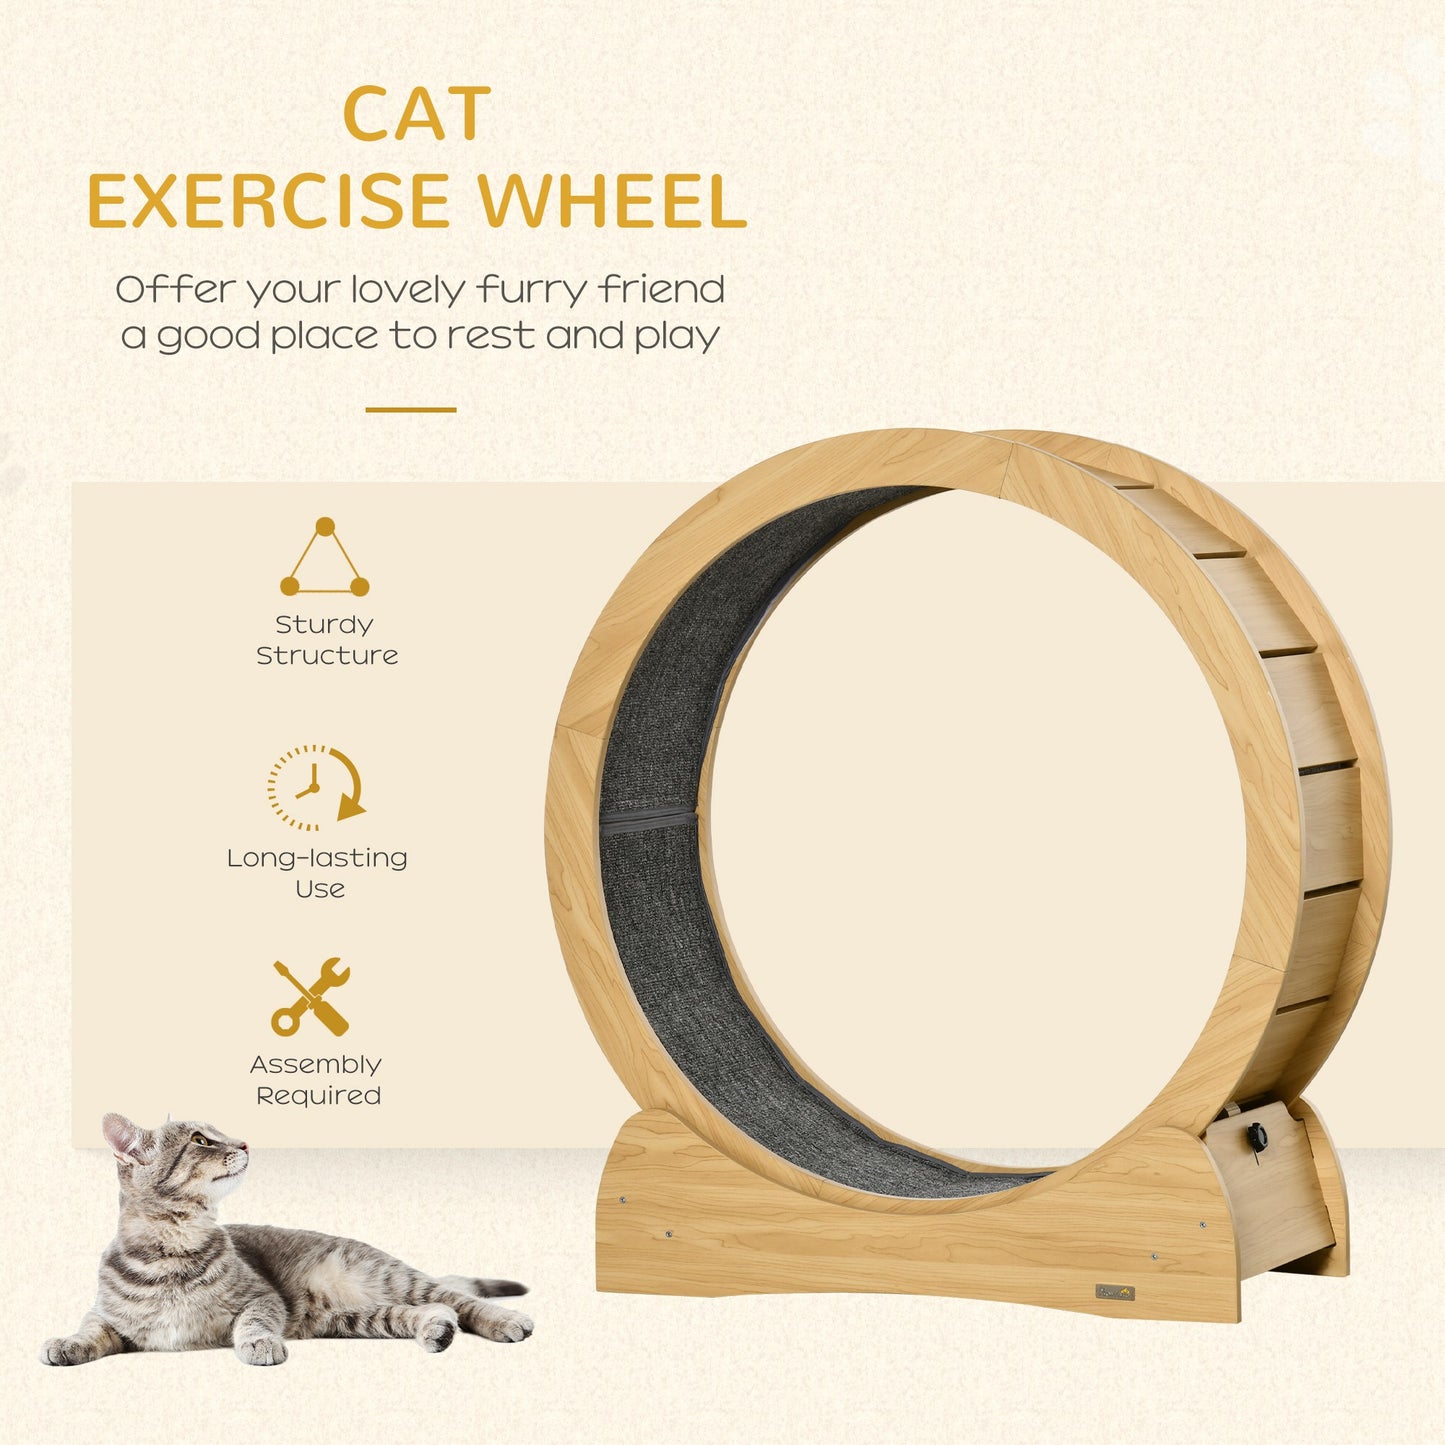 PawHut Cat Treadmill, Wooden Cat Exercise Wheel with Carpeted Runway, Cat Running Wheel with Brake, for Exercise - Natural Wood Finish